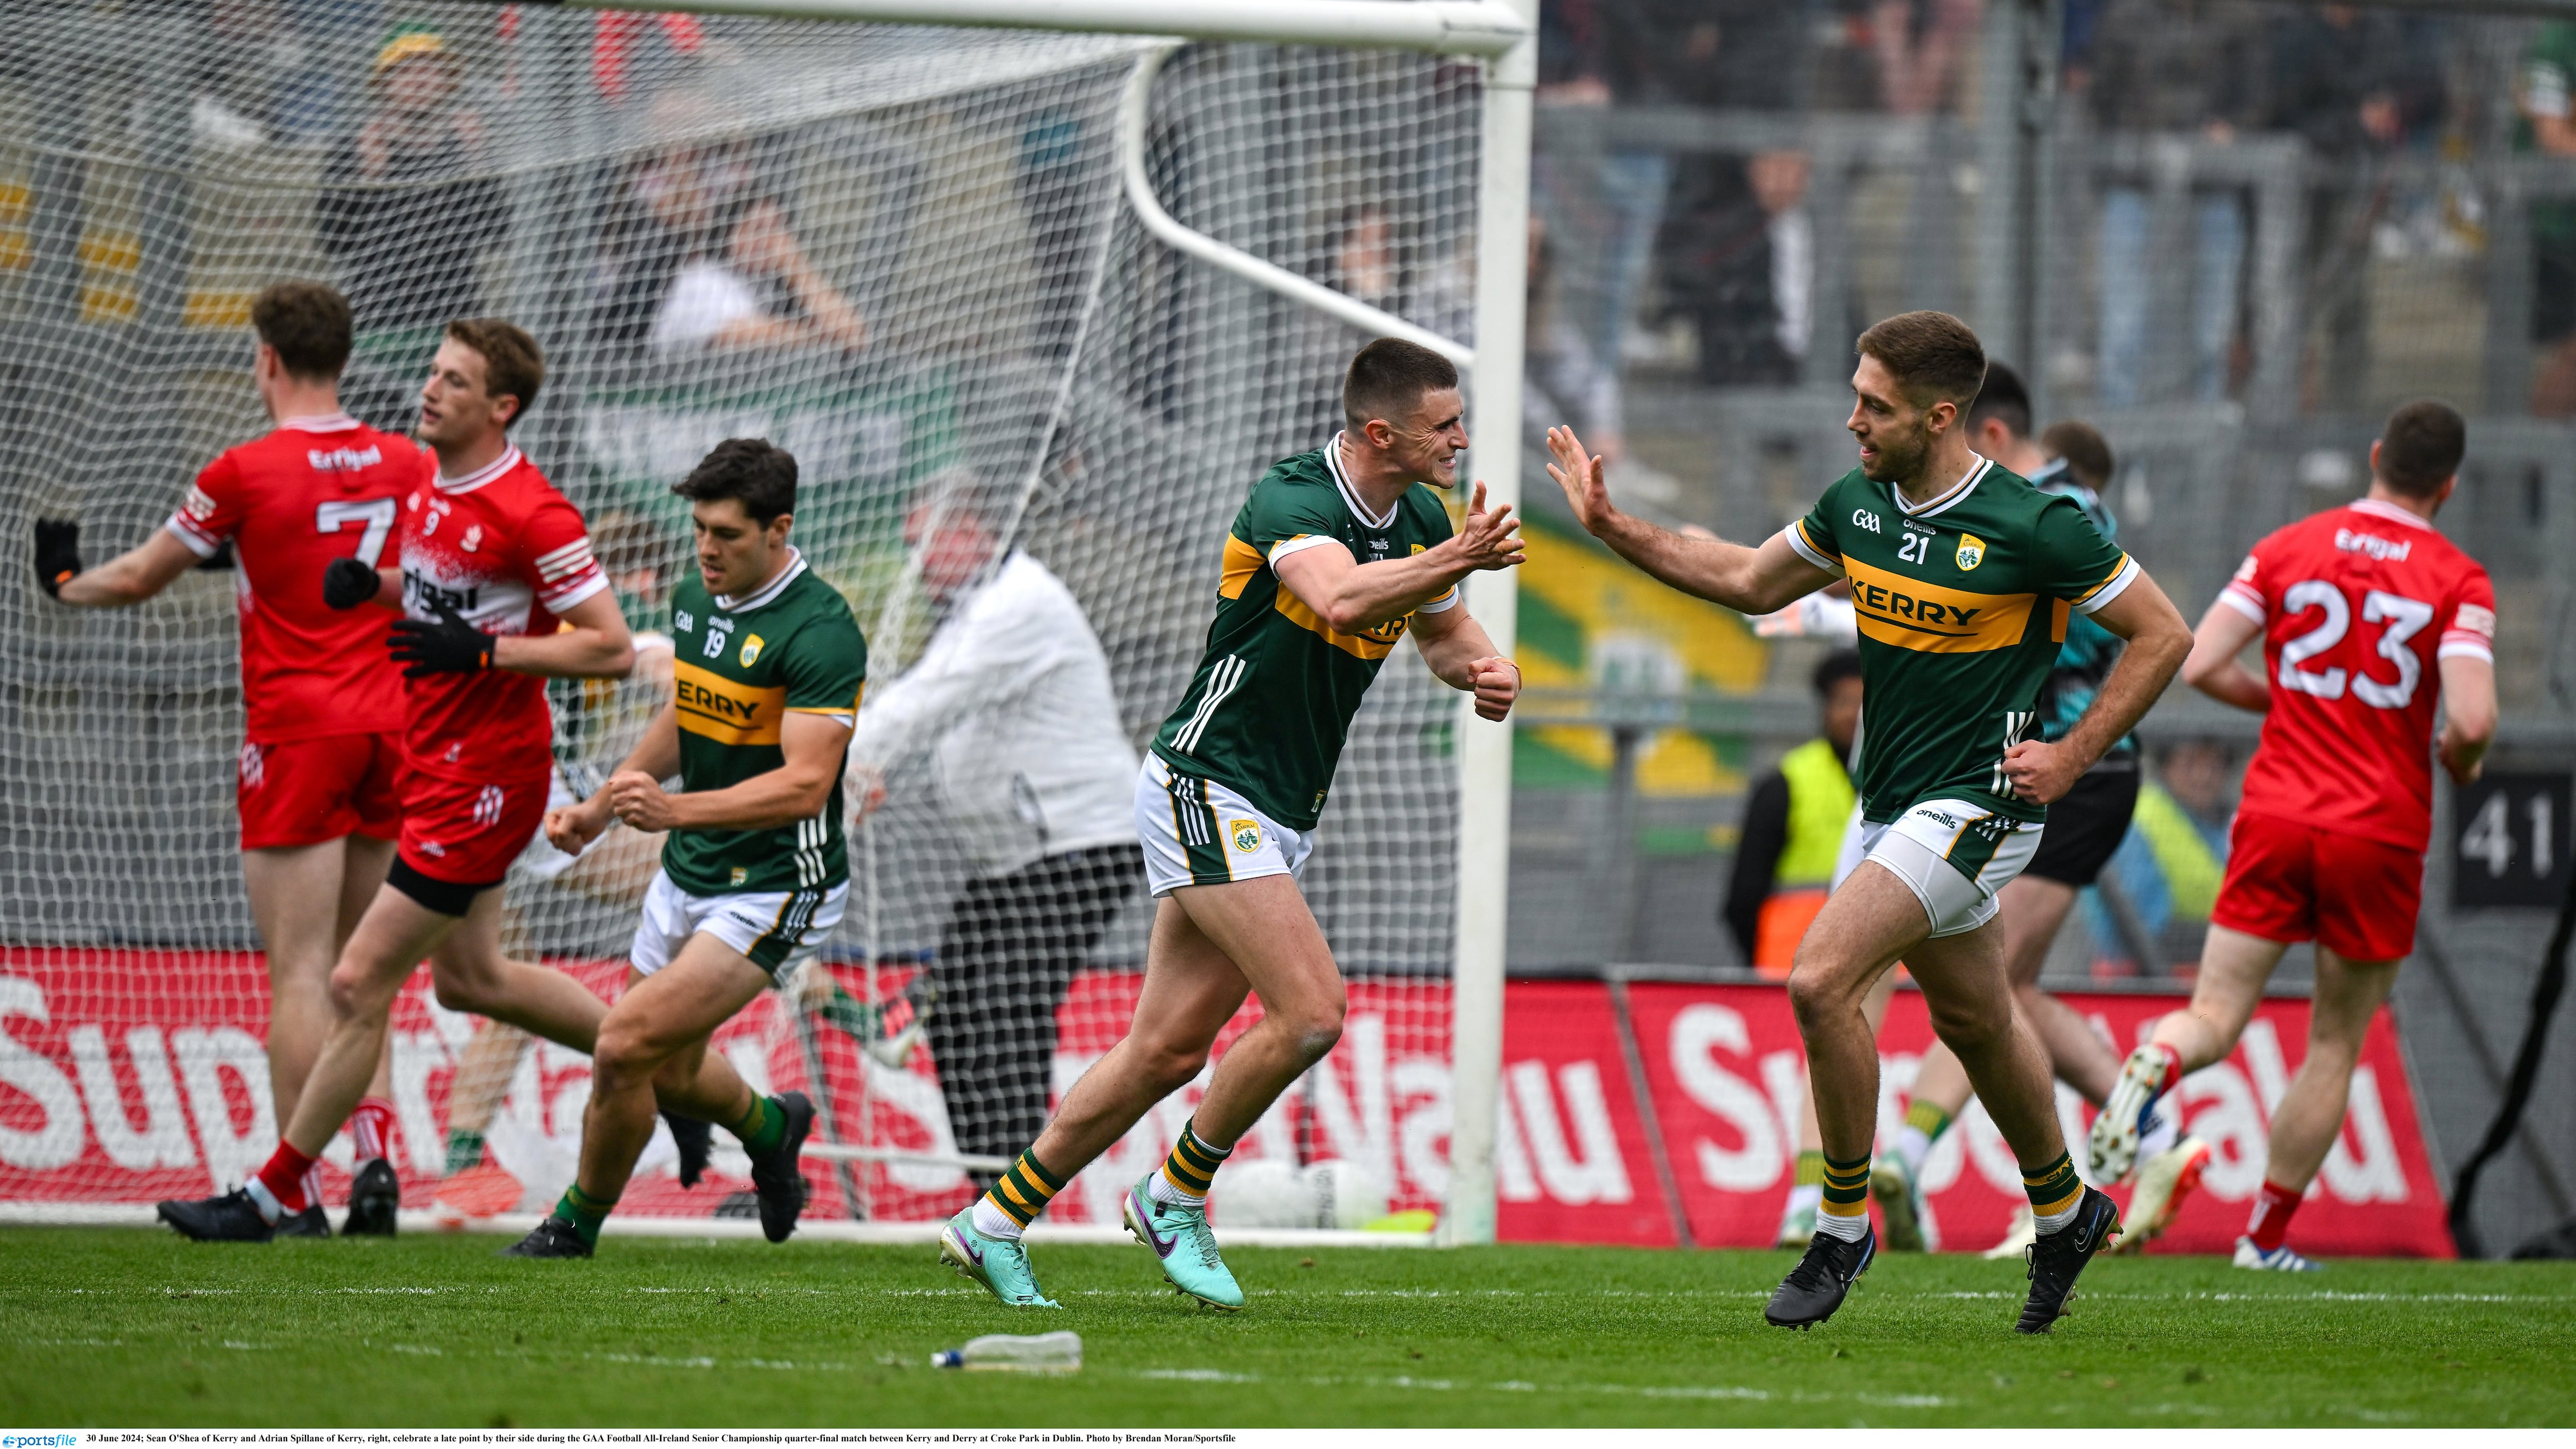 Sean O'Sheaand Adrian Spillane celebrate a late point as Kerry closed in on victory over Derry on Sunday. Picture by Brendan Moran/Sportsfile